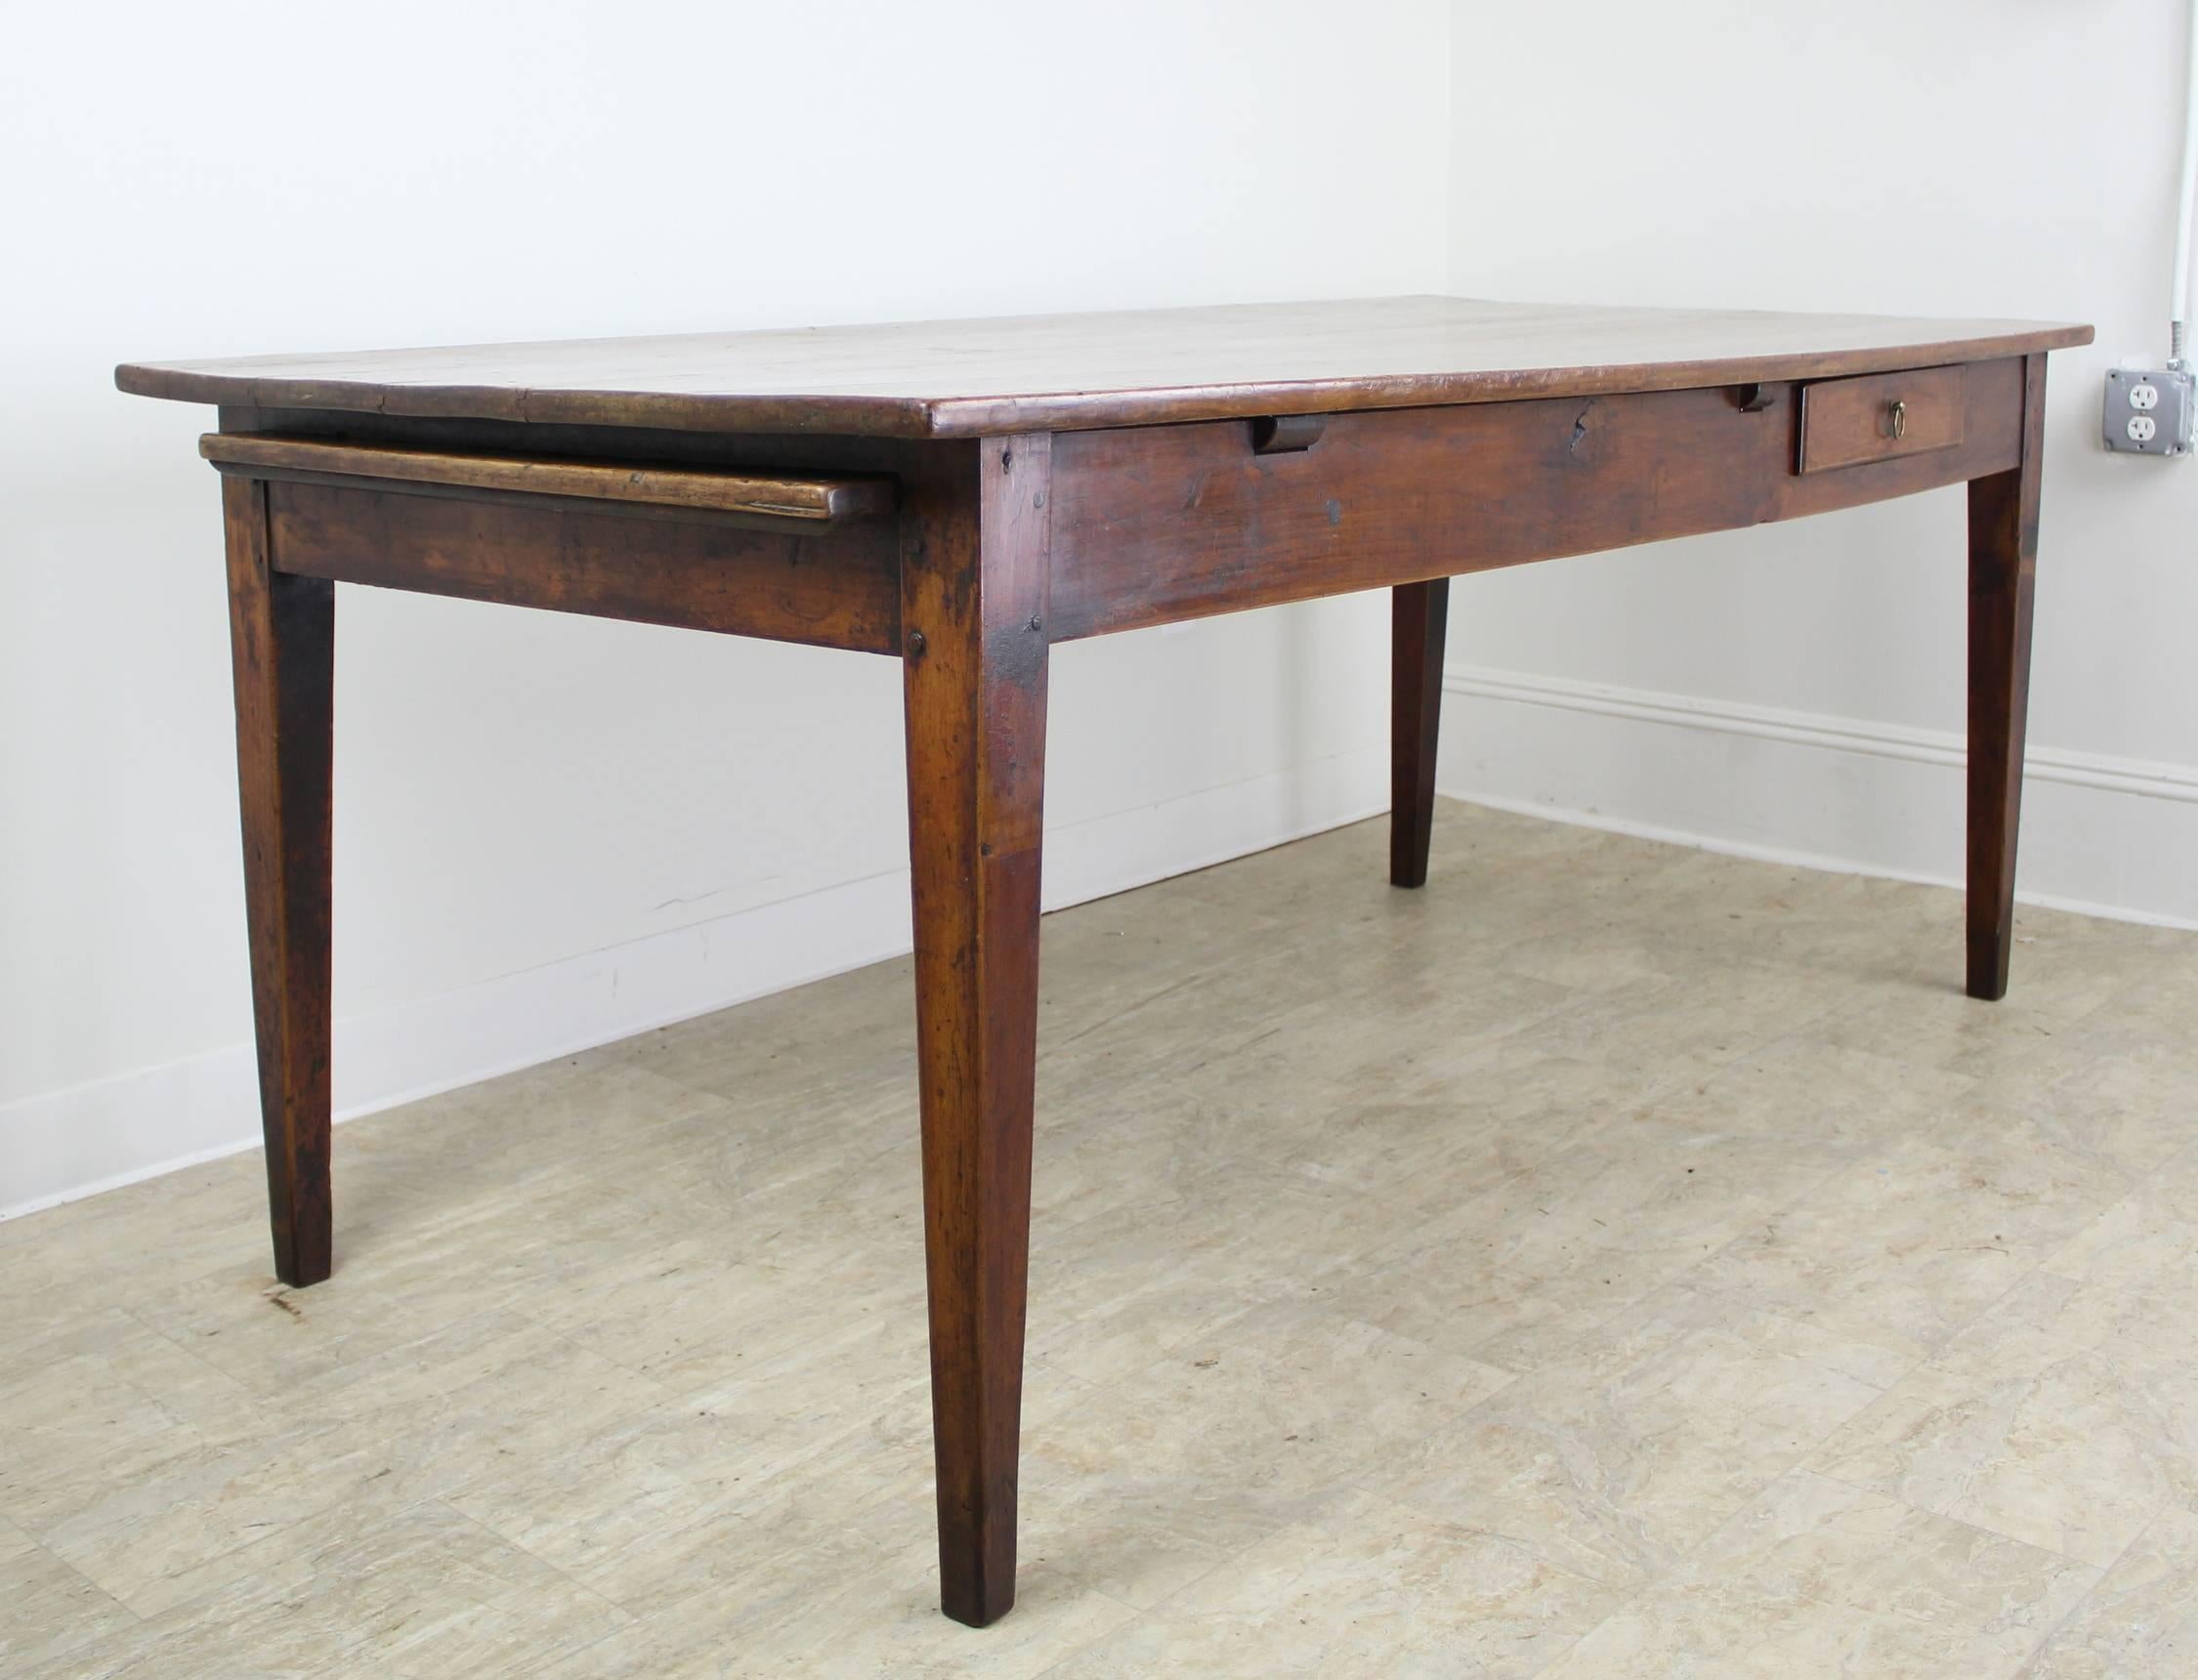 Offering the Classic elements of an exceptional antique French dining table. Standard length for eight with nice depth for plates on the side and platters down the middle. The table has lovely slender tapered legs, and the added visual interest of a